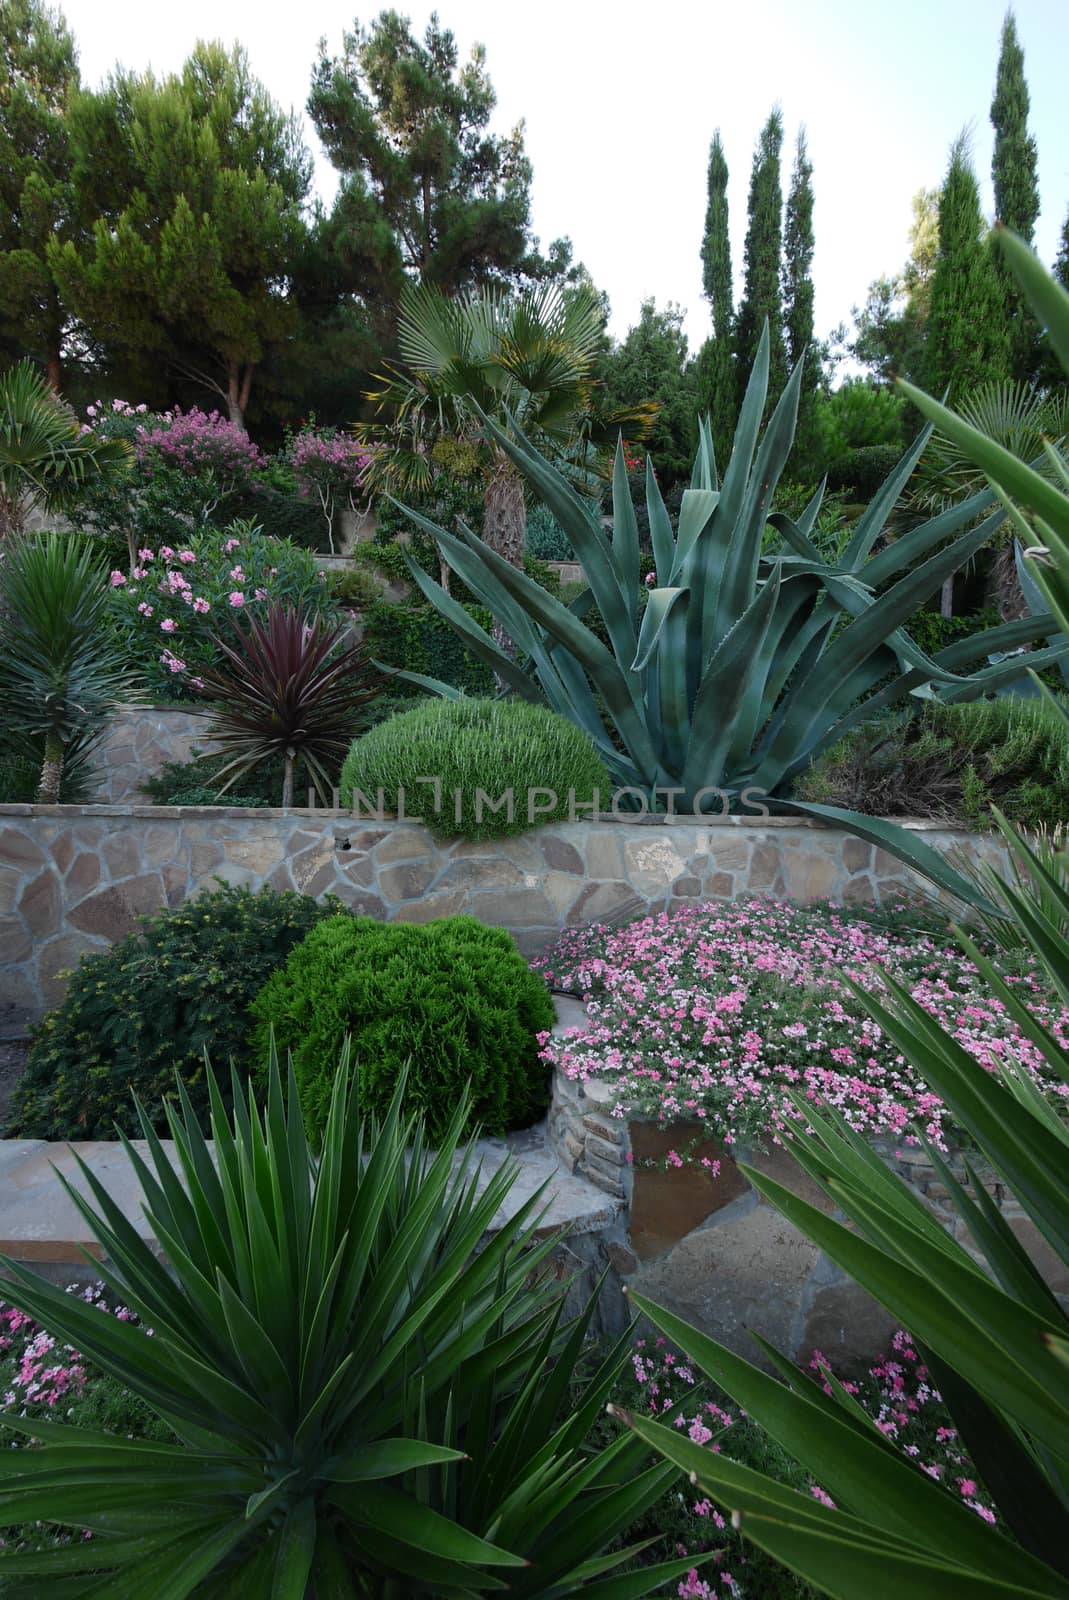 Stone fence with decorative flower beds, tall palms and green exotic plants